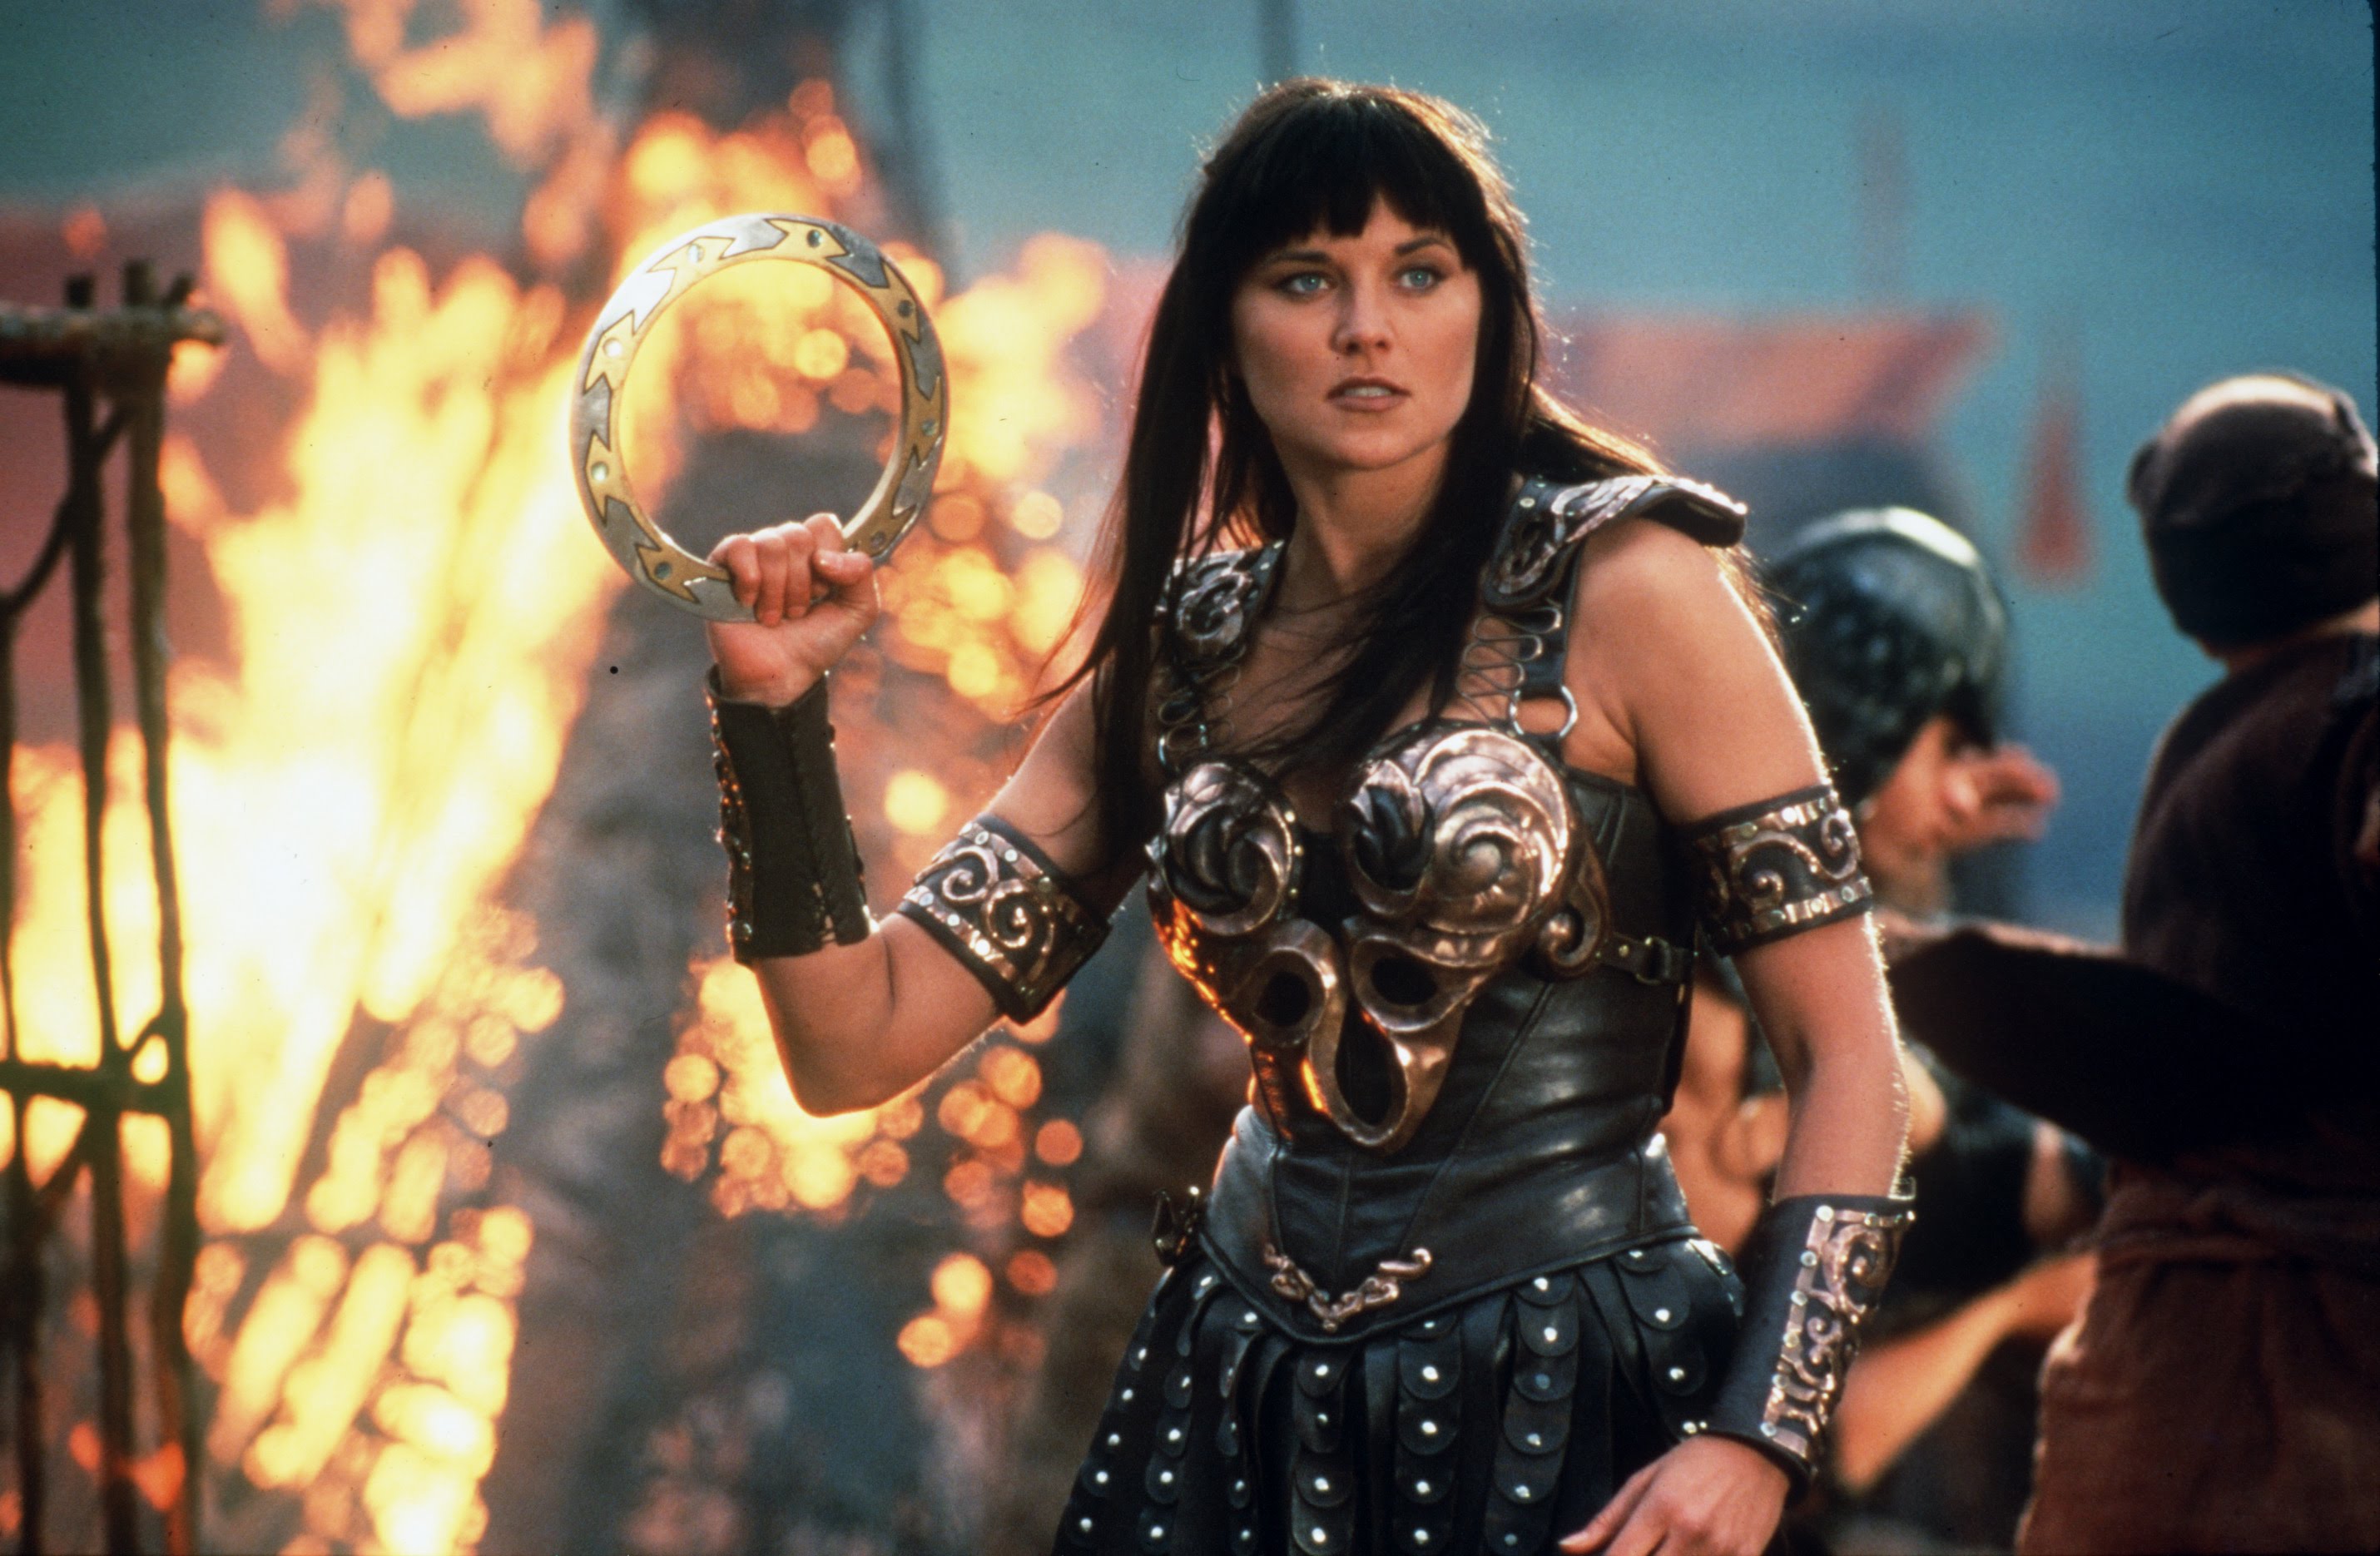 Princess xena topless warrior The Quill